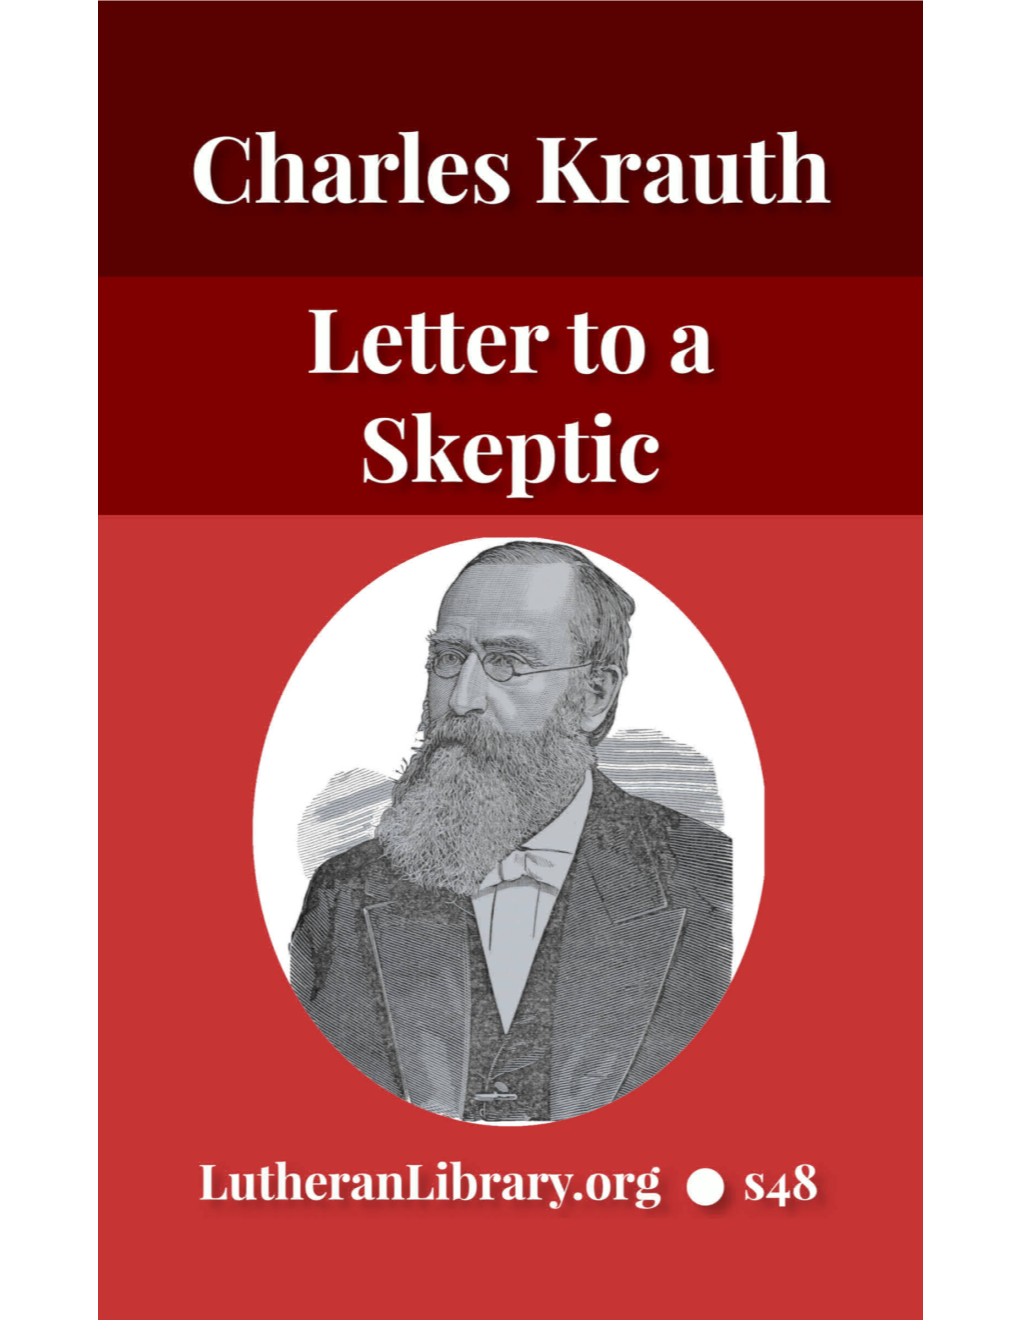 Letter to a Skeptic